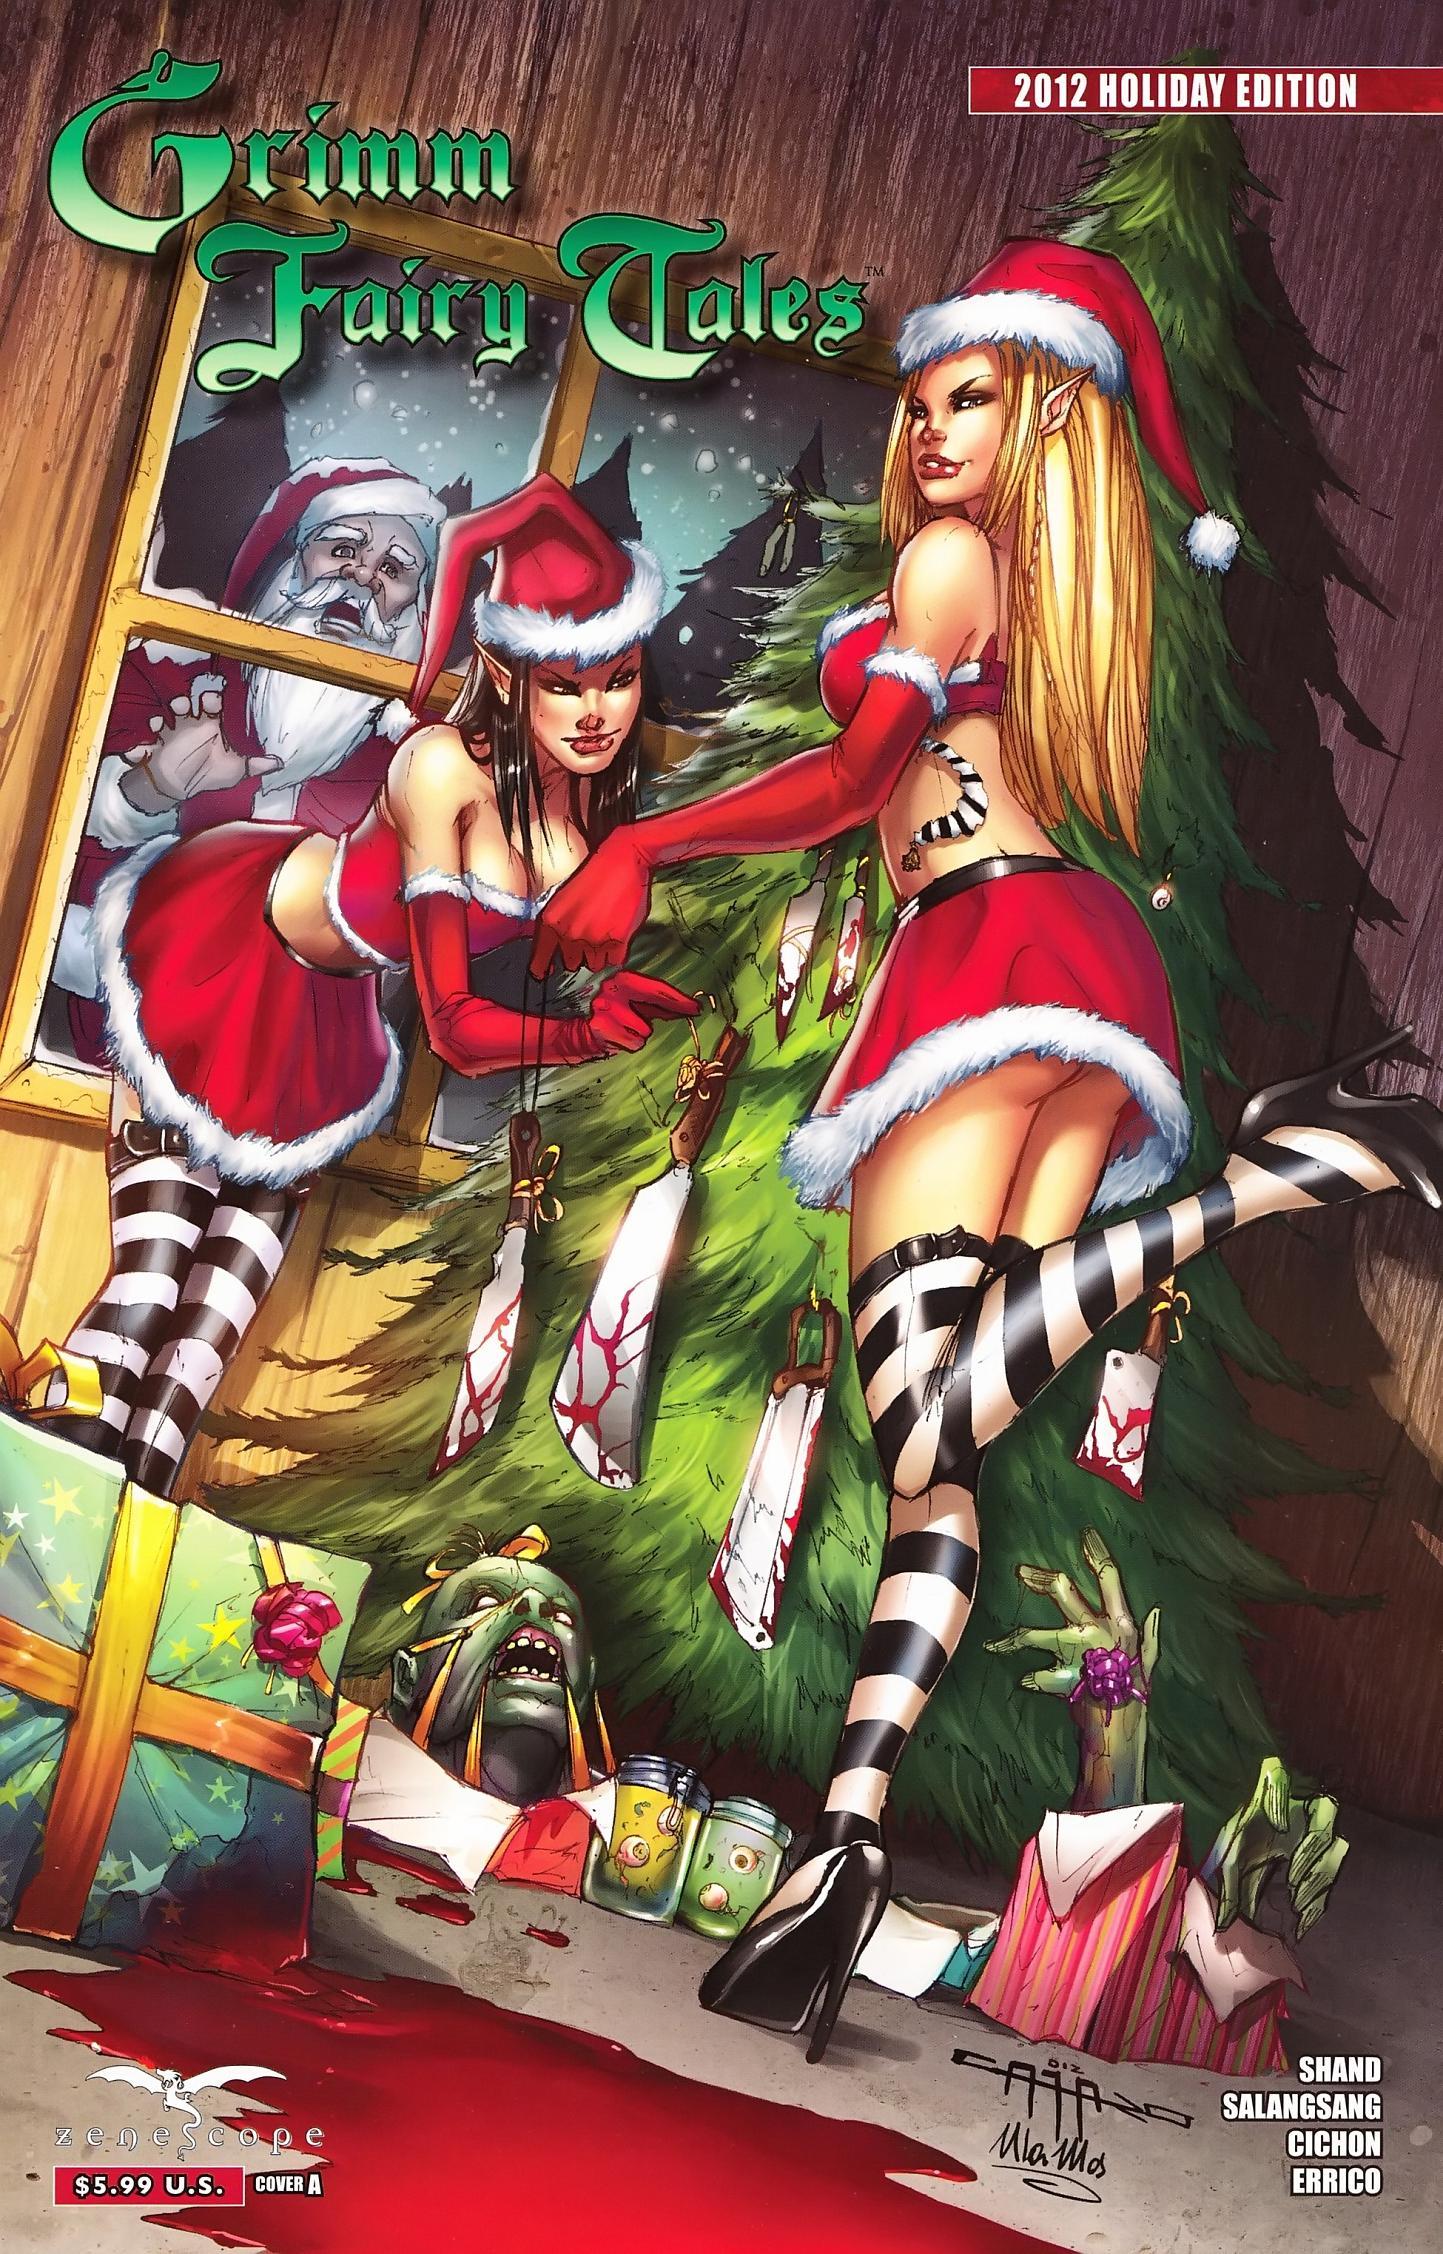 Grimm Fairy Tales: Holiday Edition #4 - 2012